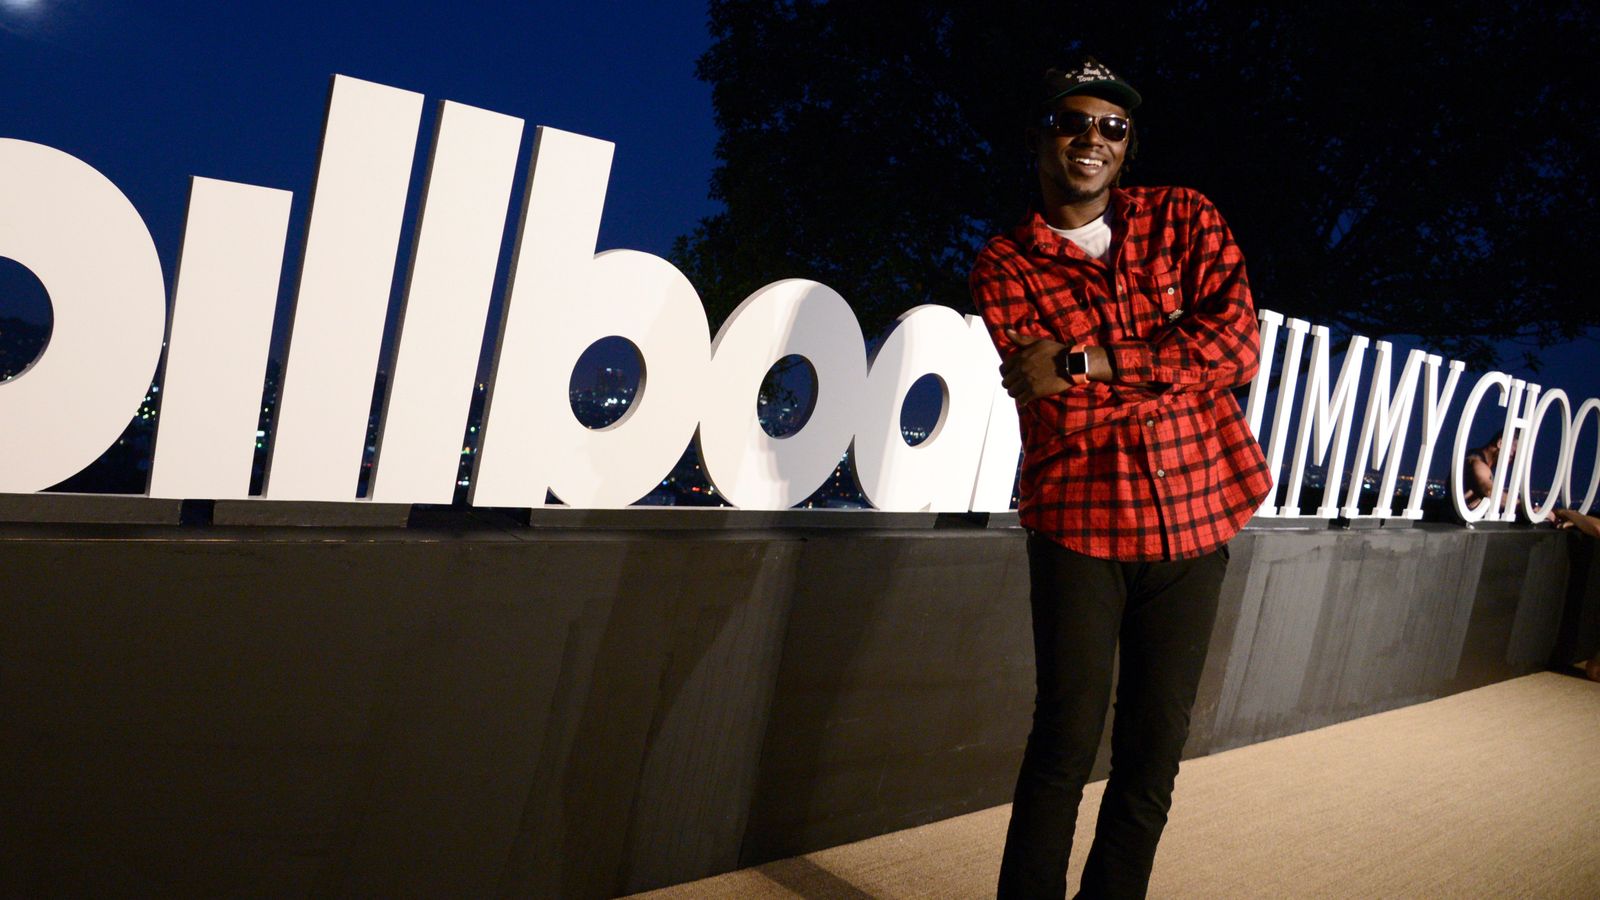 Theophilus London: Family reports rapper missing as they urge him to 'send us some signal'